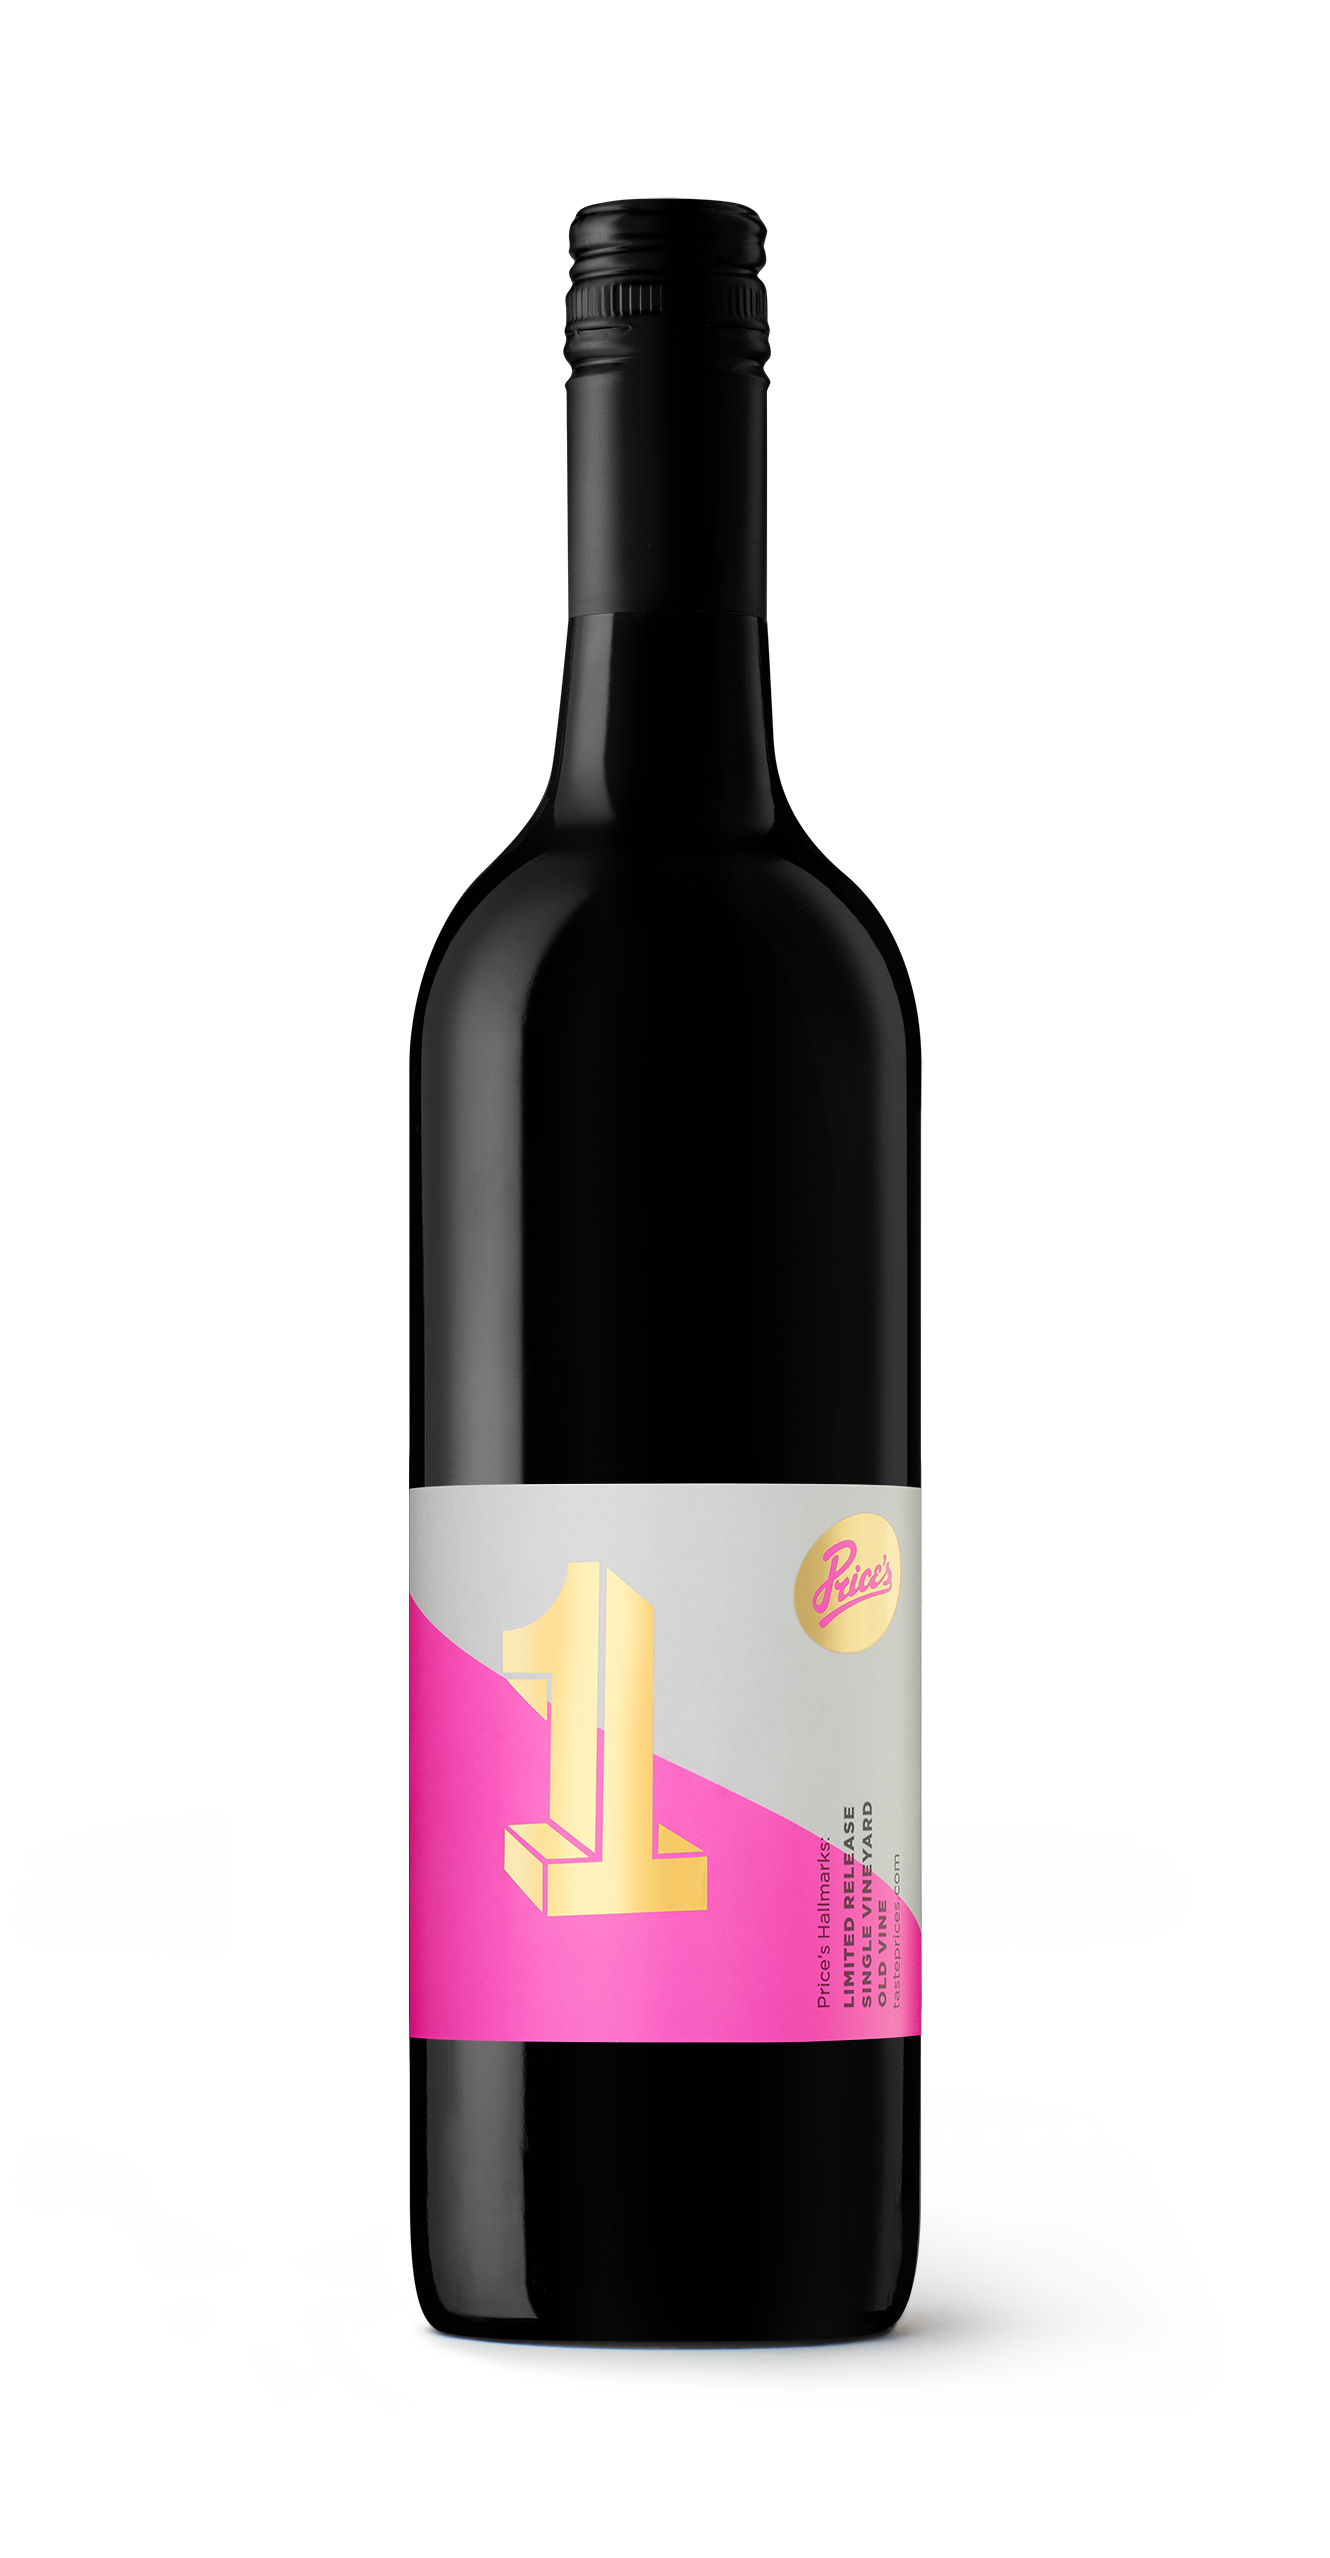 This bottle of Malbec is from McLaren Vale. Block 1 is a medium to full-bodied wine produced from old vines. It has a striking label and is of excellent quality from Price's Wines.